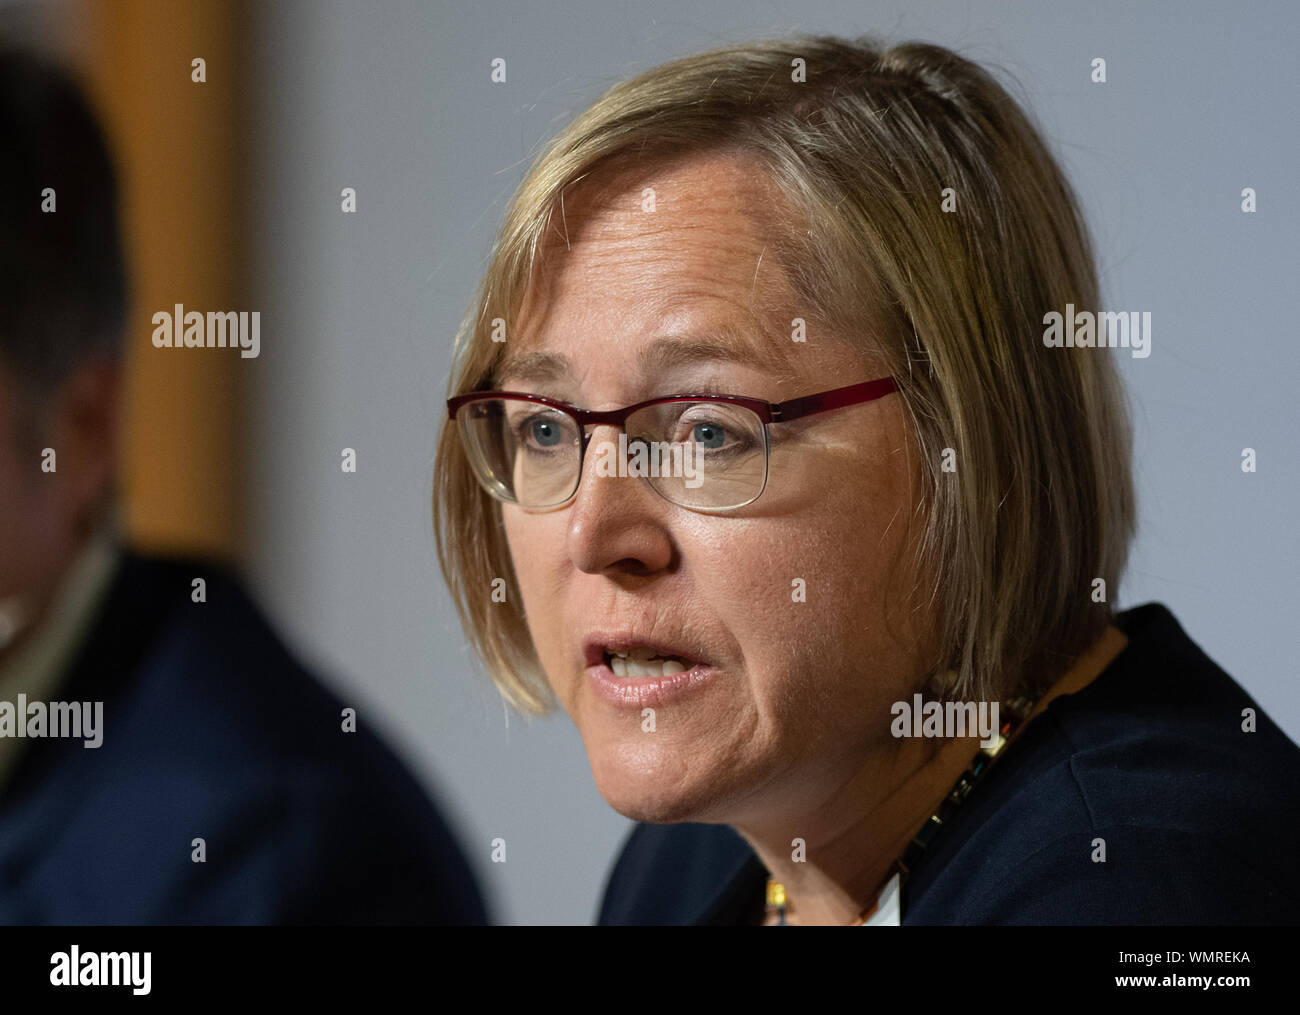 05 September 2019, Berlin: Kerstin Haarmann, Federal Chairman of the Ecological Transport Club VCD, speaks at a panel discussion on the "Climate crisis and the mobility of the future". Photo: Christophe Gateau/dpa Stock Photo